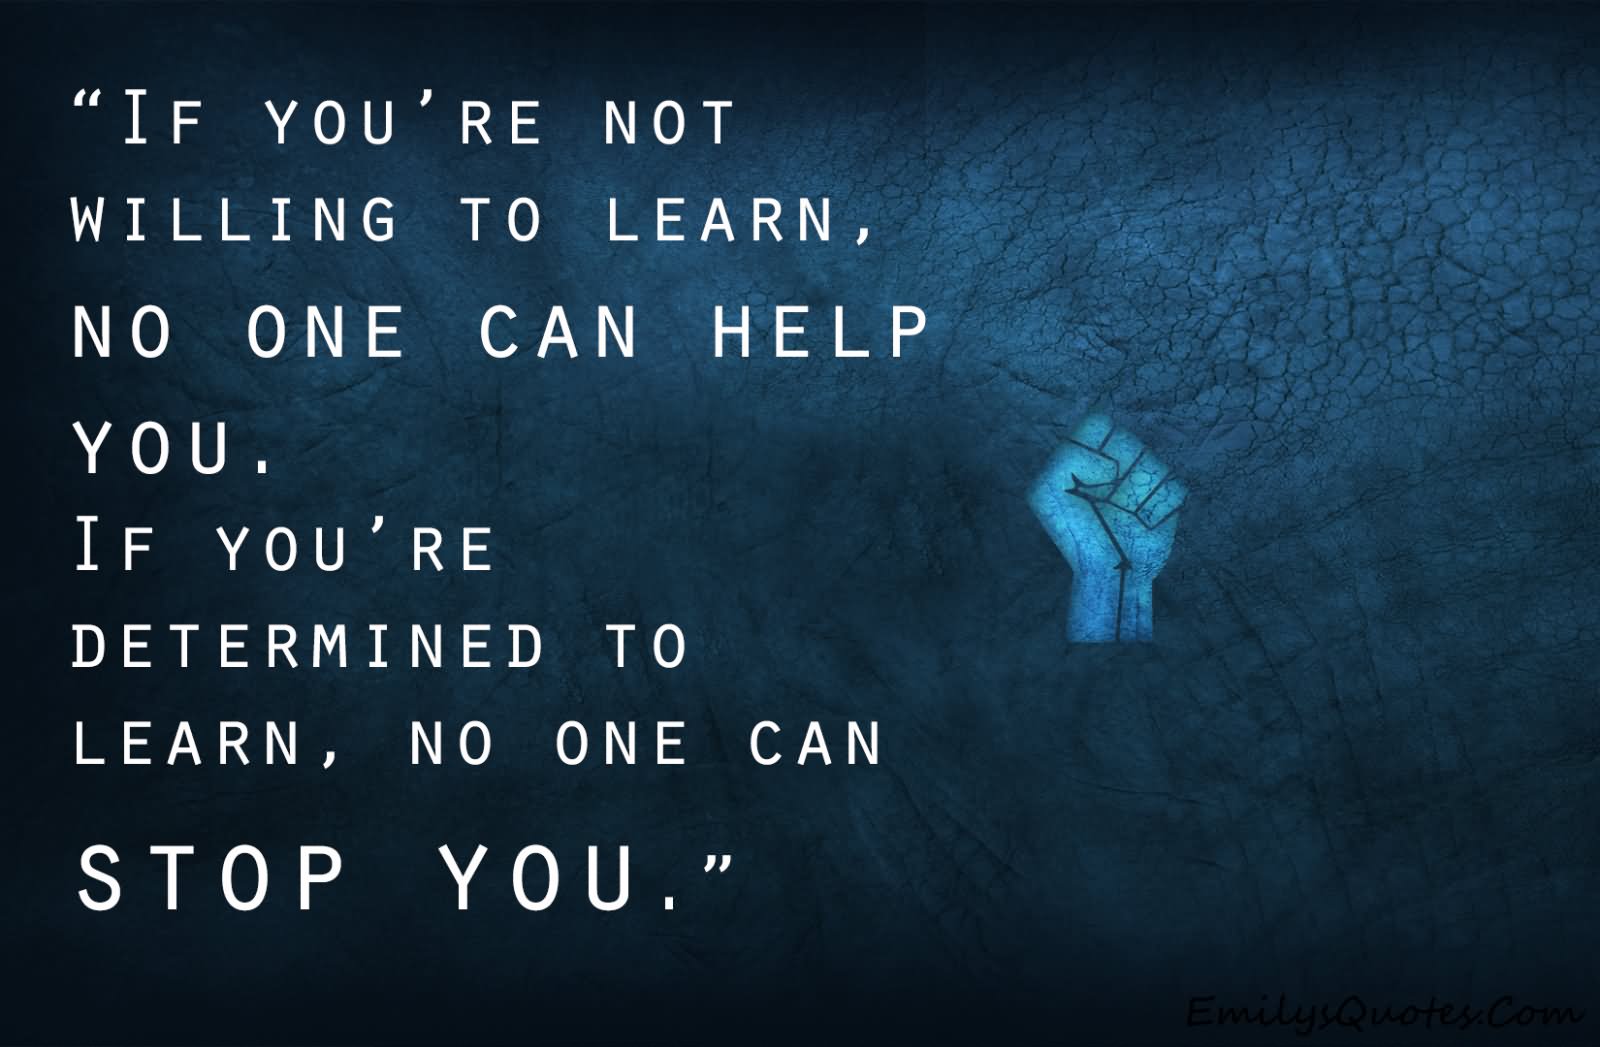 If you are not willing to learn, no one can help you. If you are determined to learn, no one can stop you